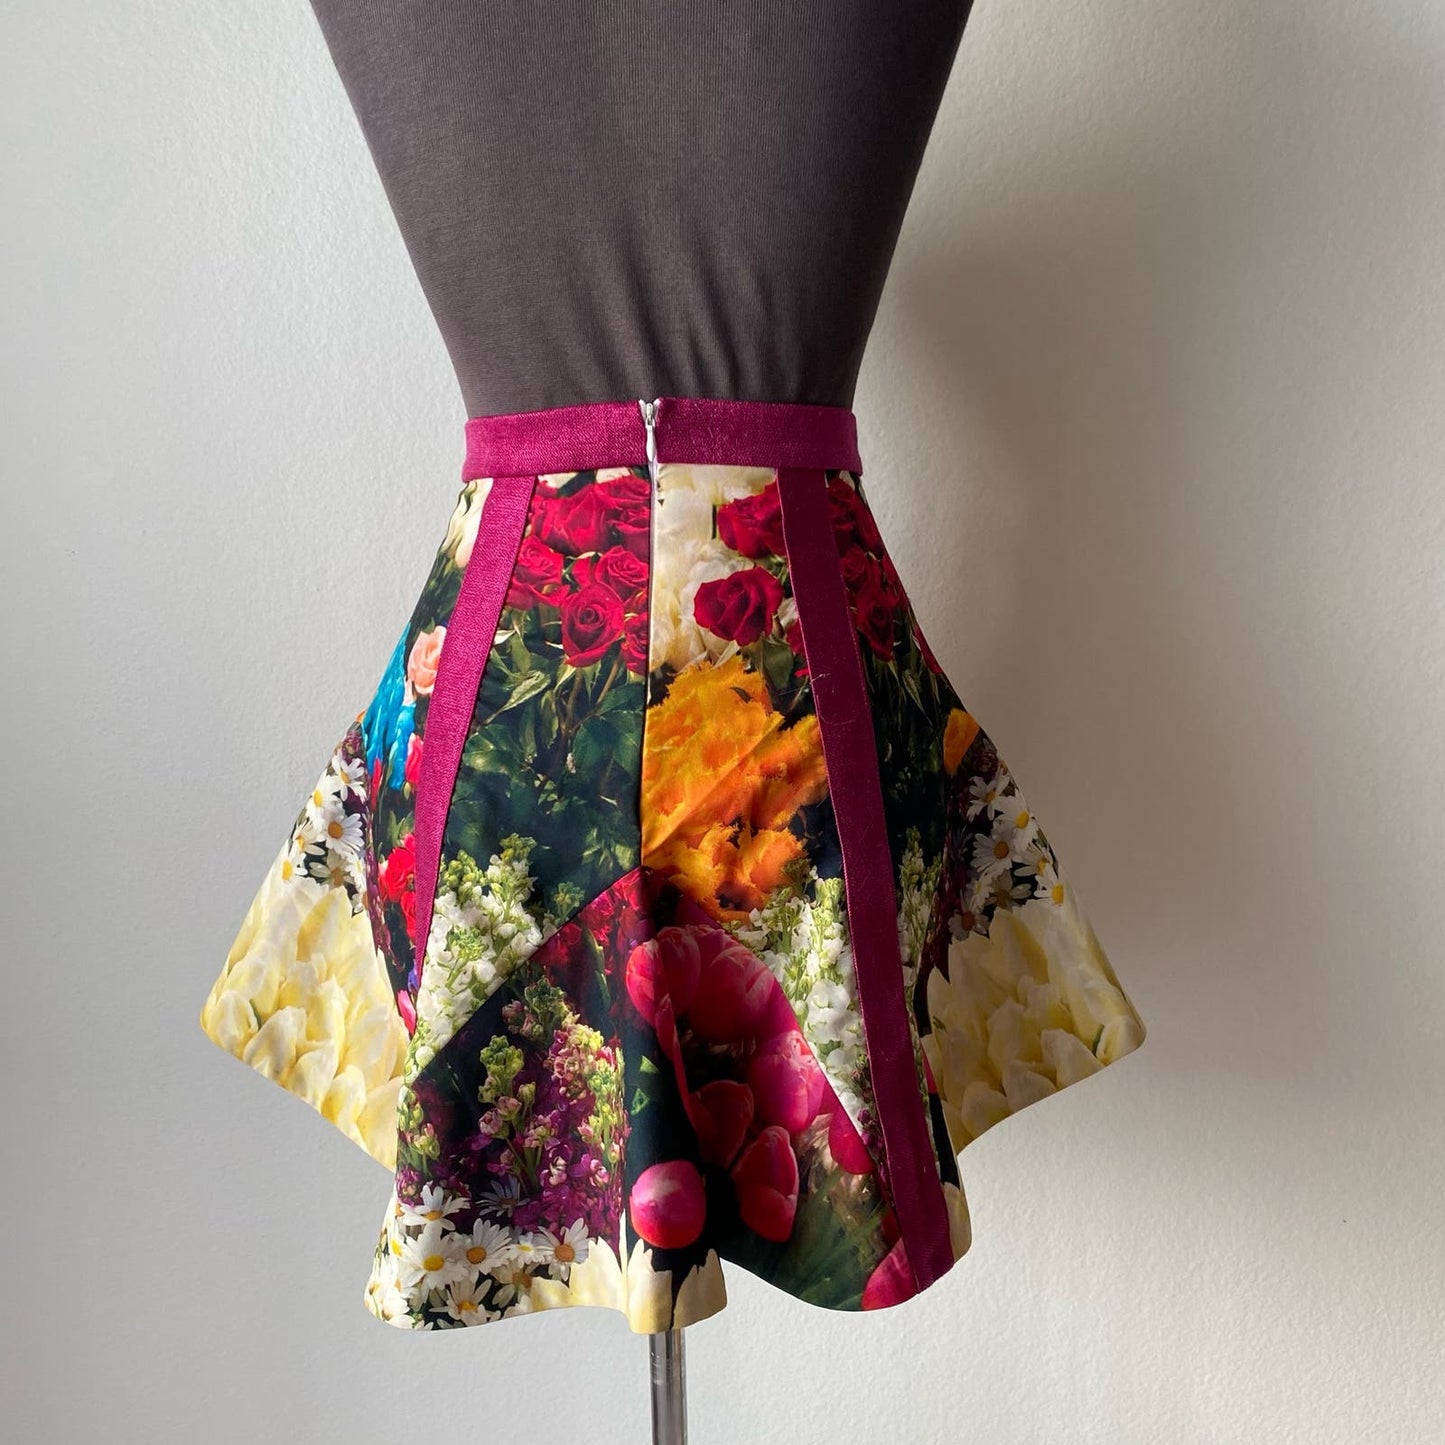 Cameo S floral flare mini skirt NWOT